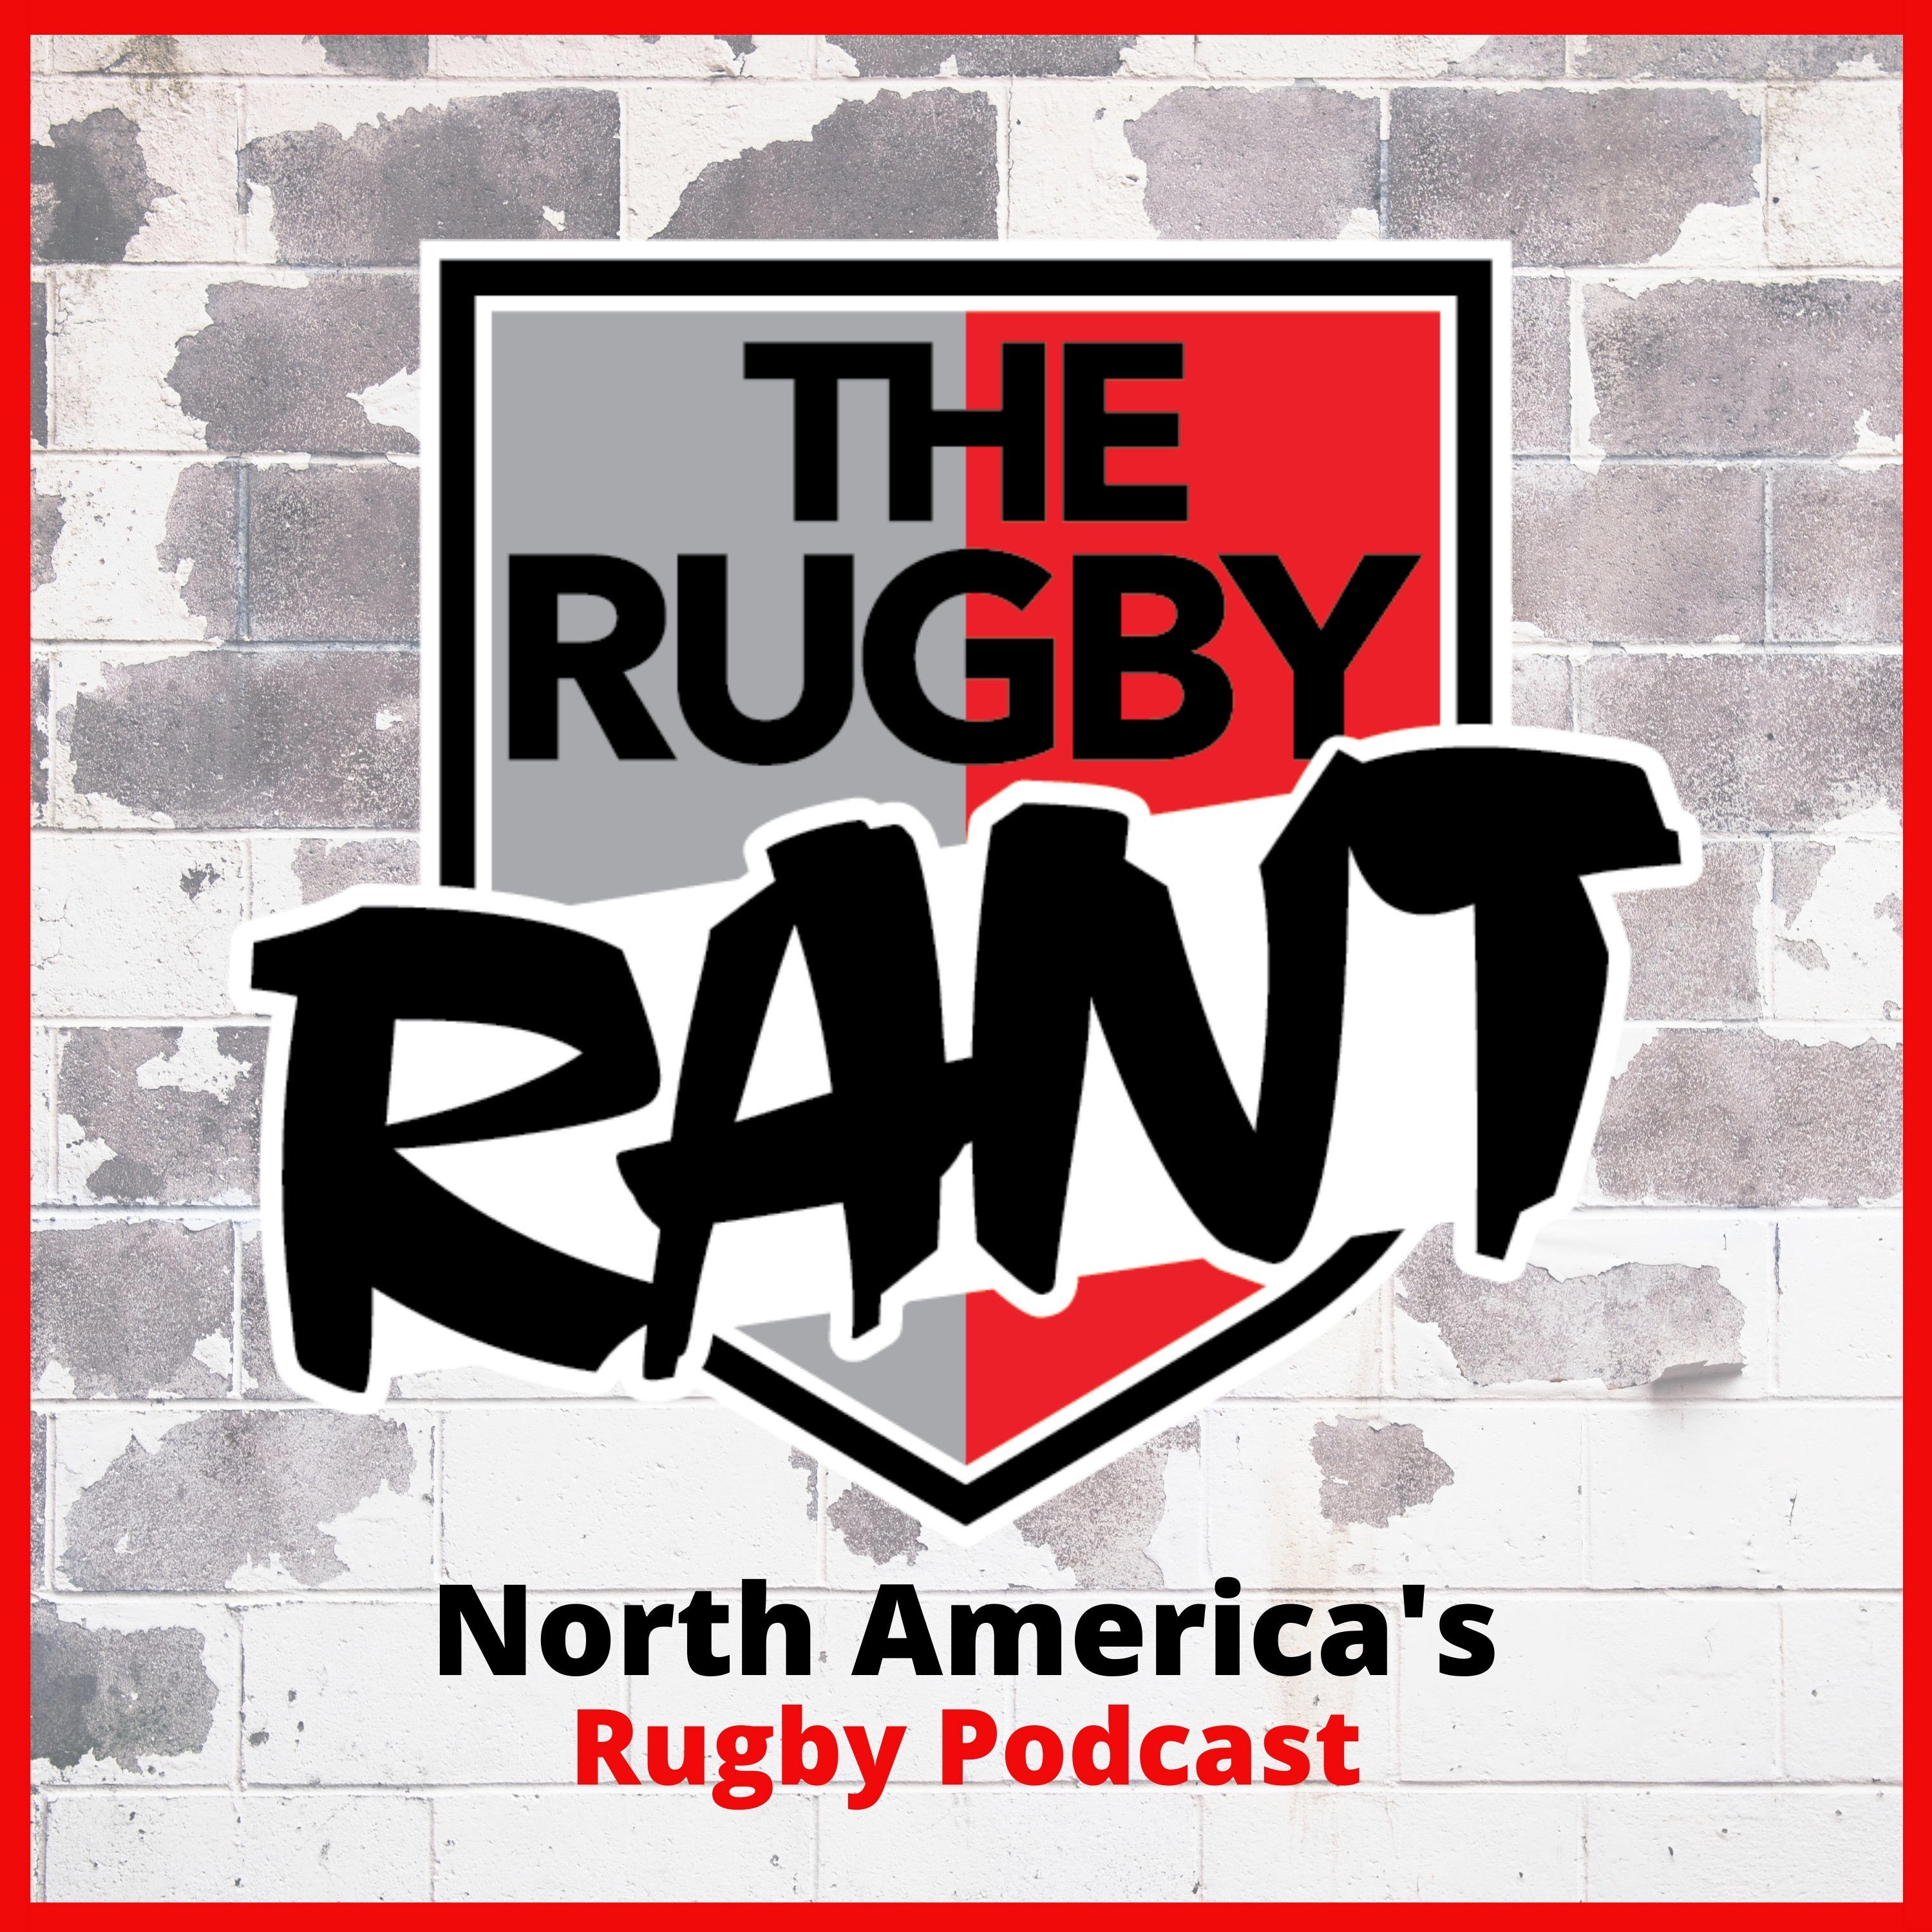 The Rugby Rant - Episode 40